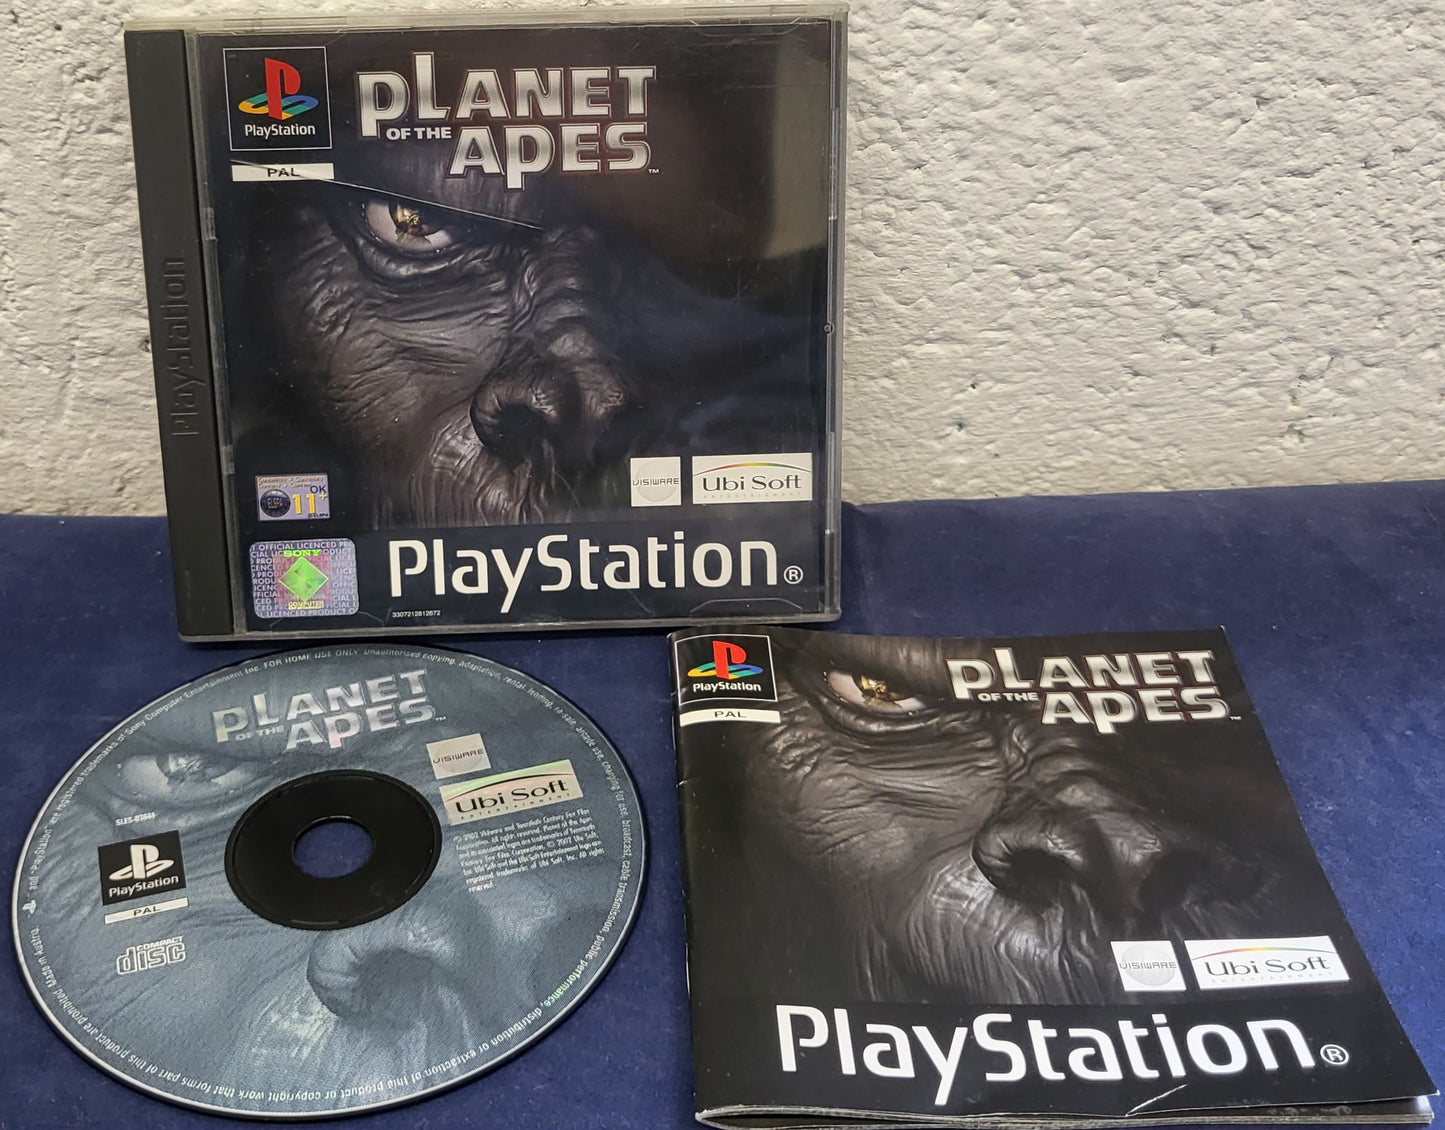 Planet of the Apes Sony Playstation 1 (PS1) Game